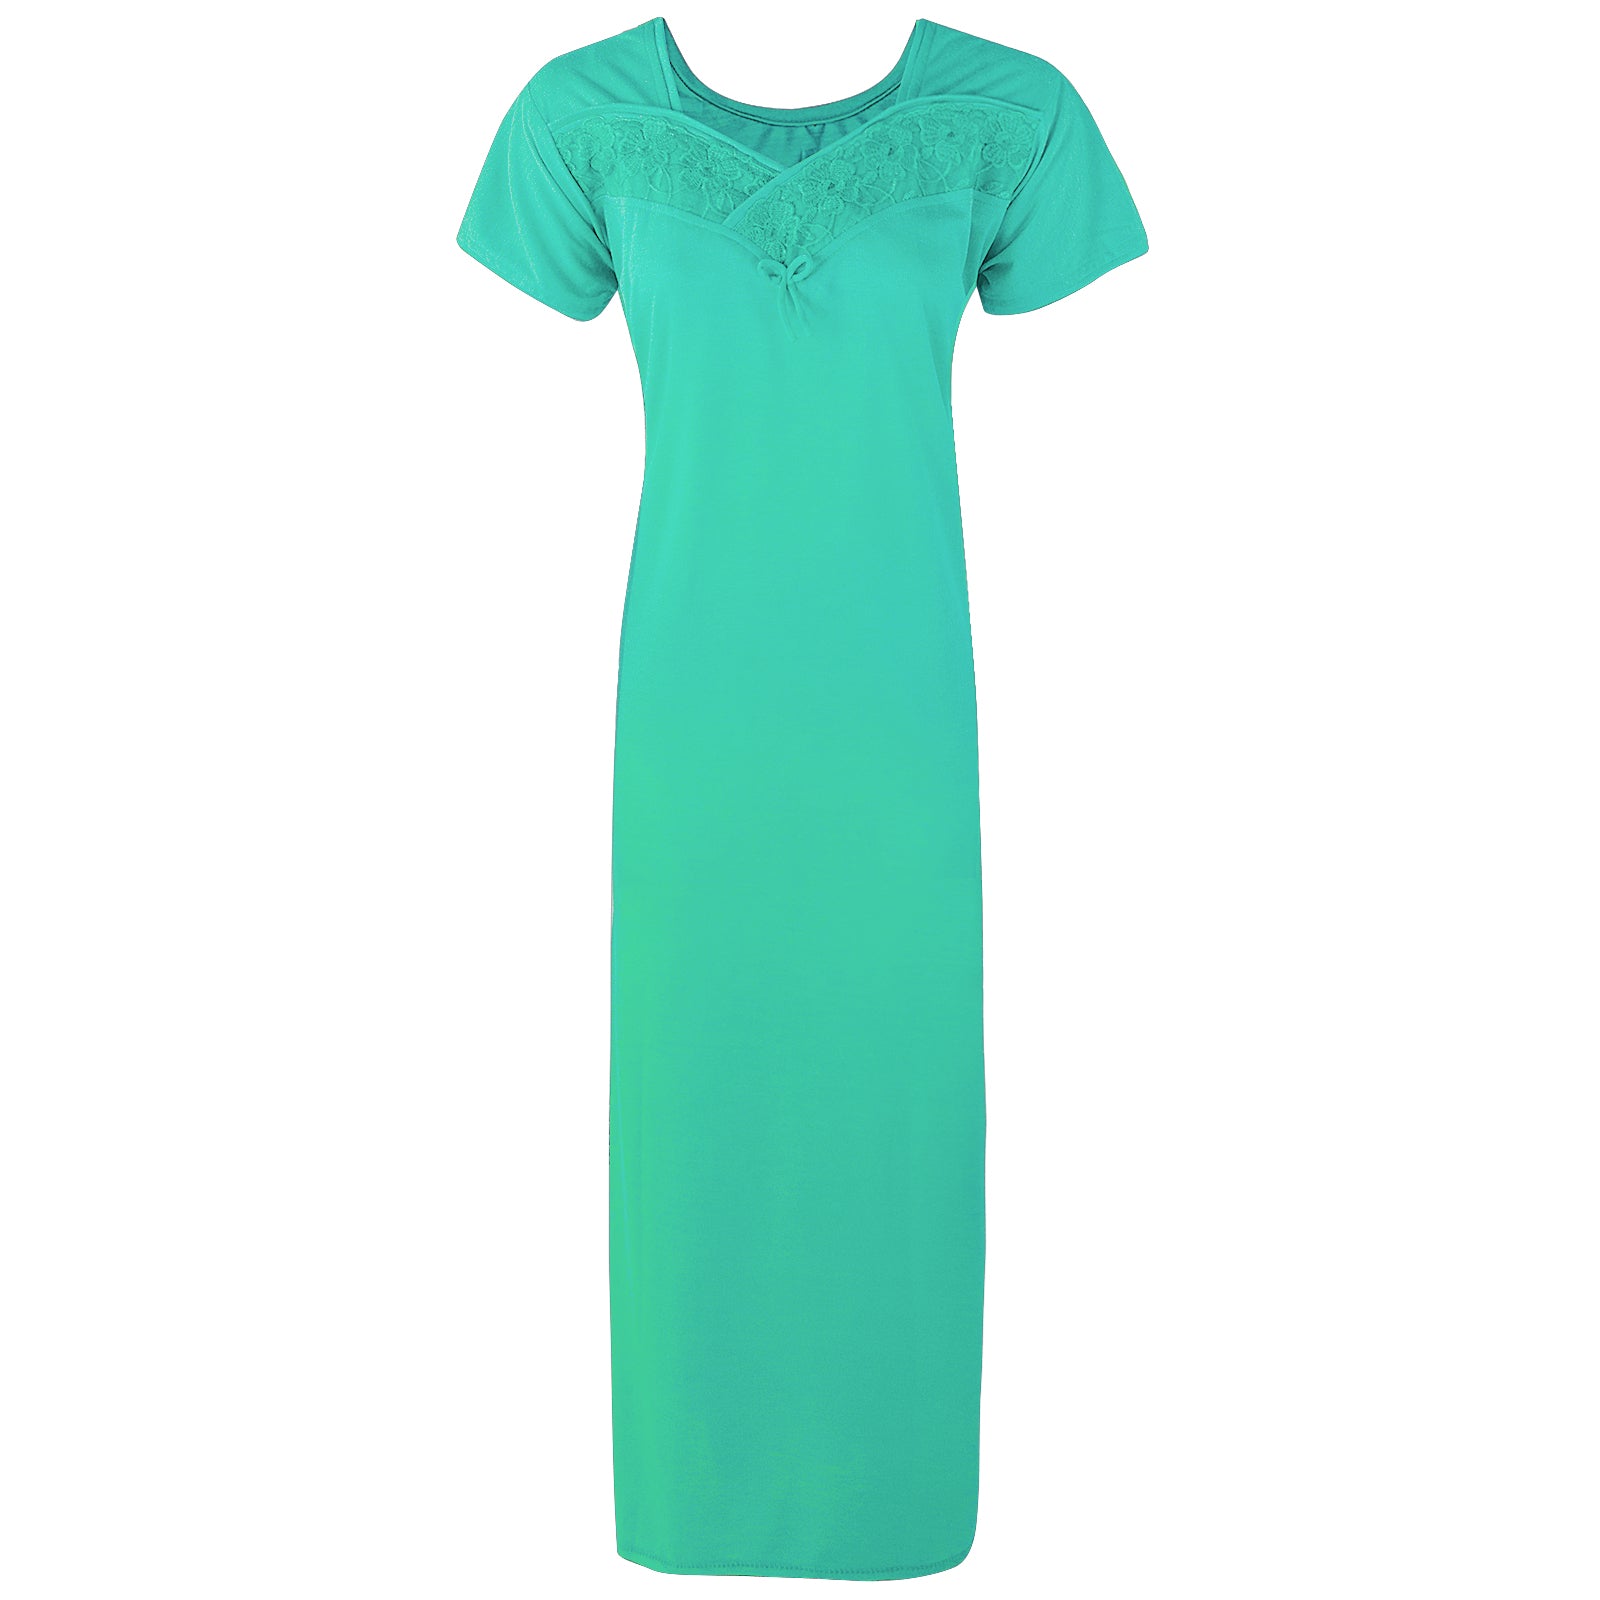 Teal / 12-16 Cotton Blend Comfy Jersey Nightdress The Orange Tags